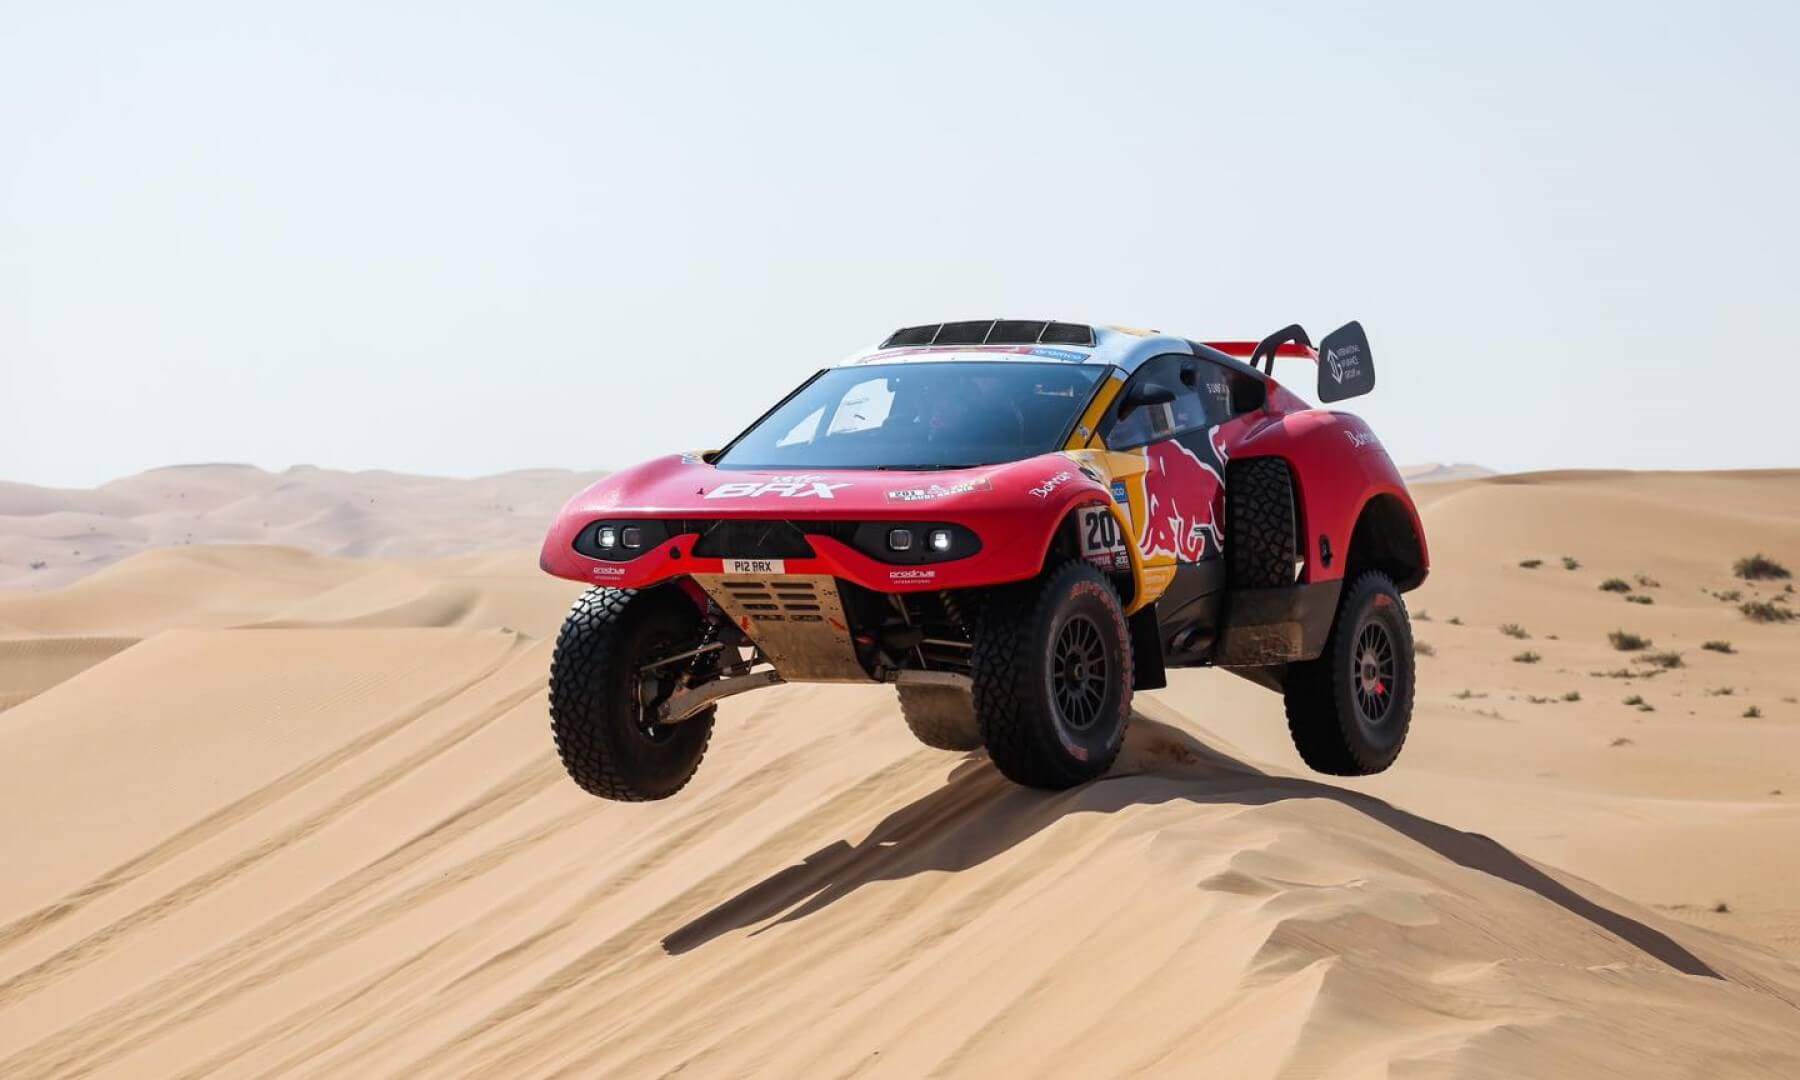 Sebastien Loeb claimed yet another victory on 2023 Dakar stage 11